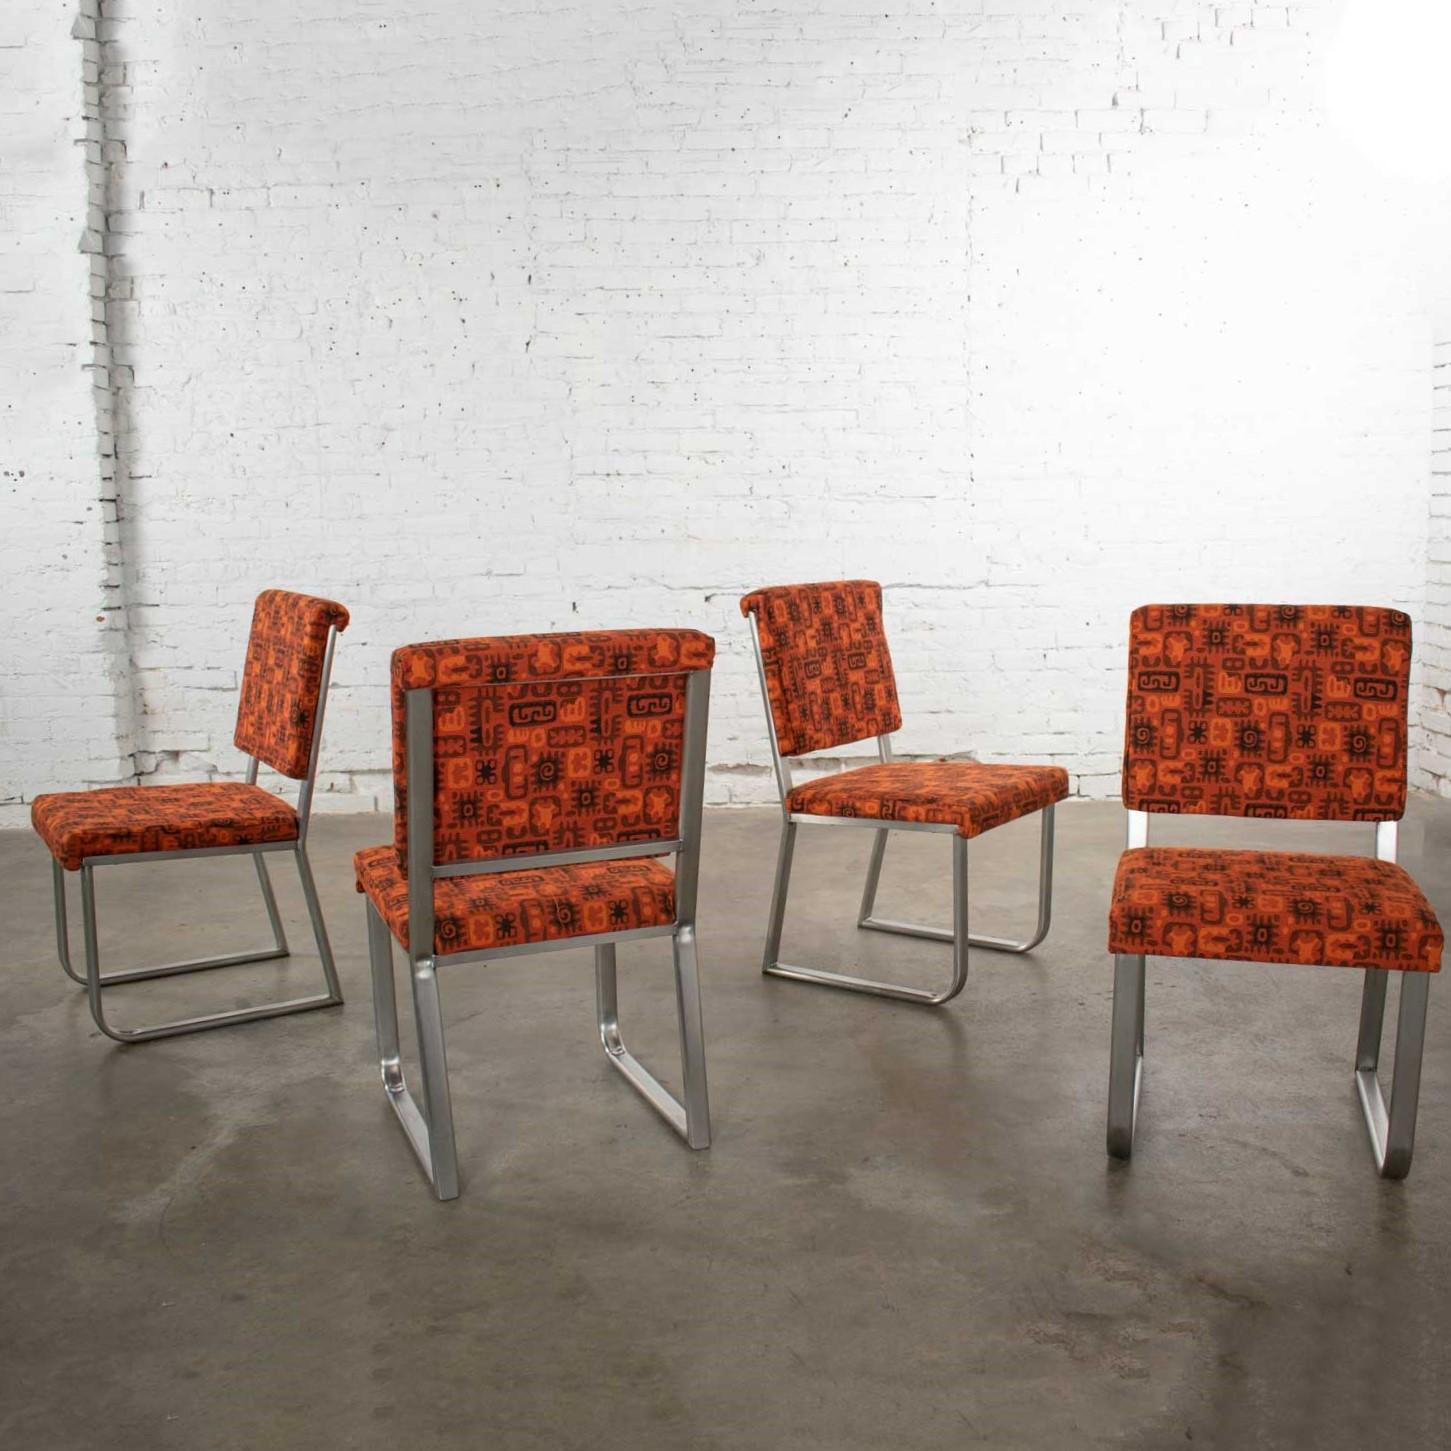 Outstanding set of four Streamline Modern, Mid-Century Modern, Art Deco, or Industrial modern railroad dining car chairs in stainless steel with original orange abstract upholstery. They are in fabulous original condition and ready to use. Please